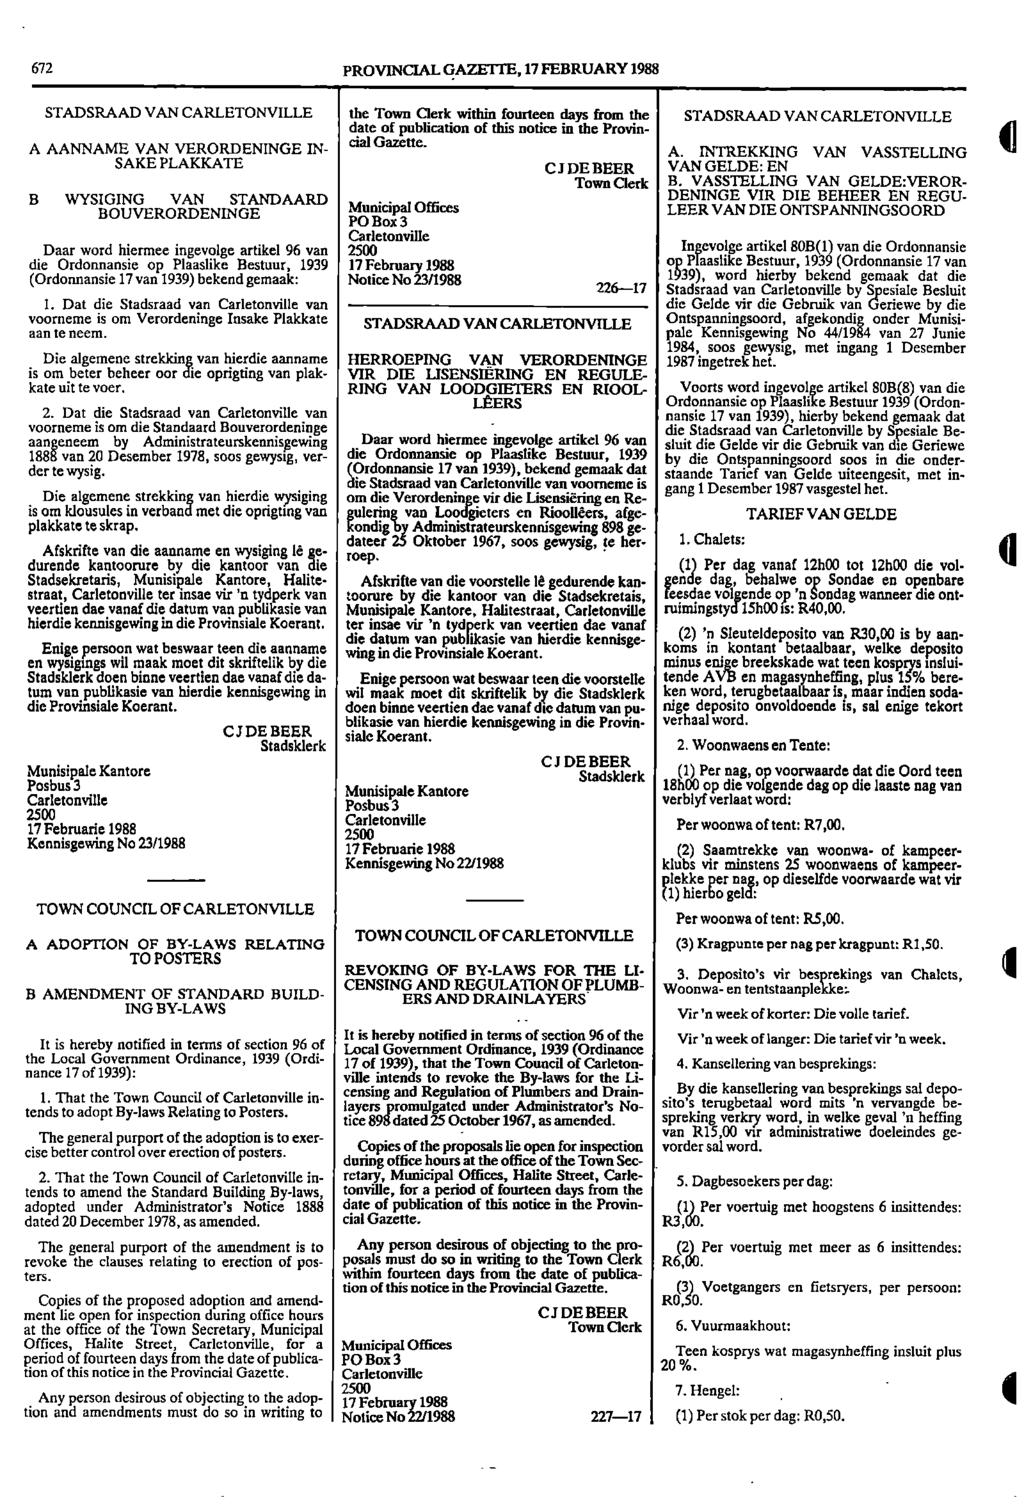 672 PROVINCIAL GAZETTE, 17 FEBRUARY 1988 STADSRAAD VAN CARLETONVILLE the Town Clerk within fourteen days from the STADSRAAD VAN CARLETONVILLE date of publication of this notice in the Provin A